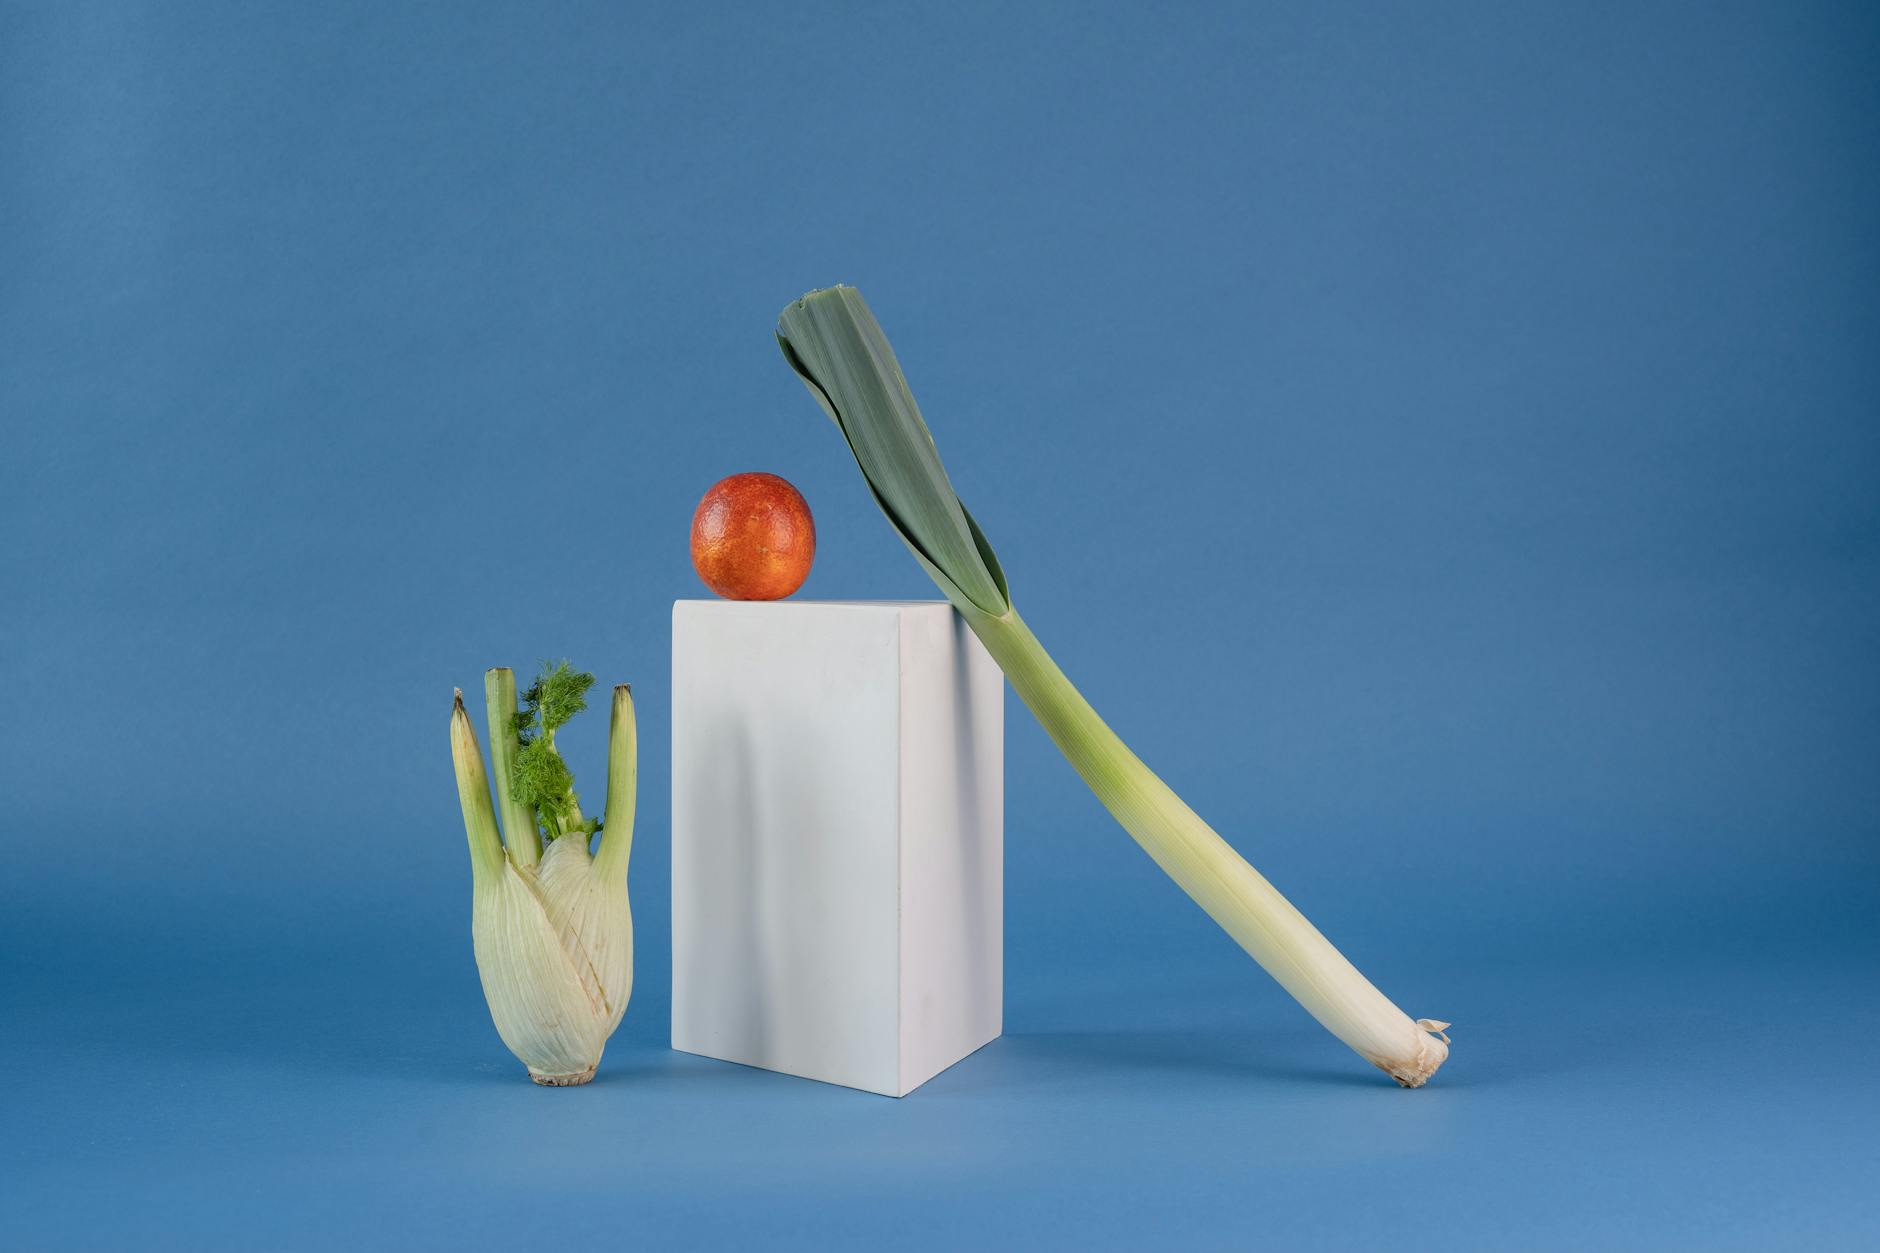 Vegetable and Fruit on a White Shape